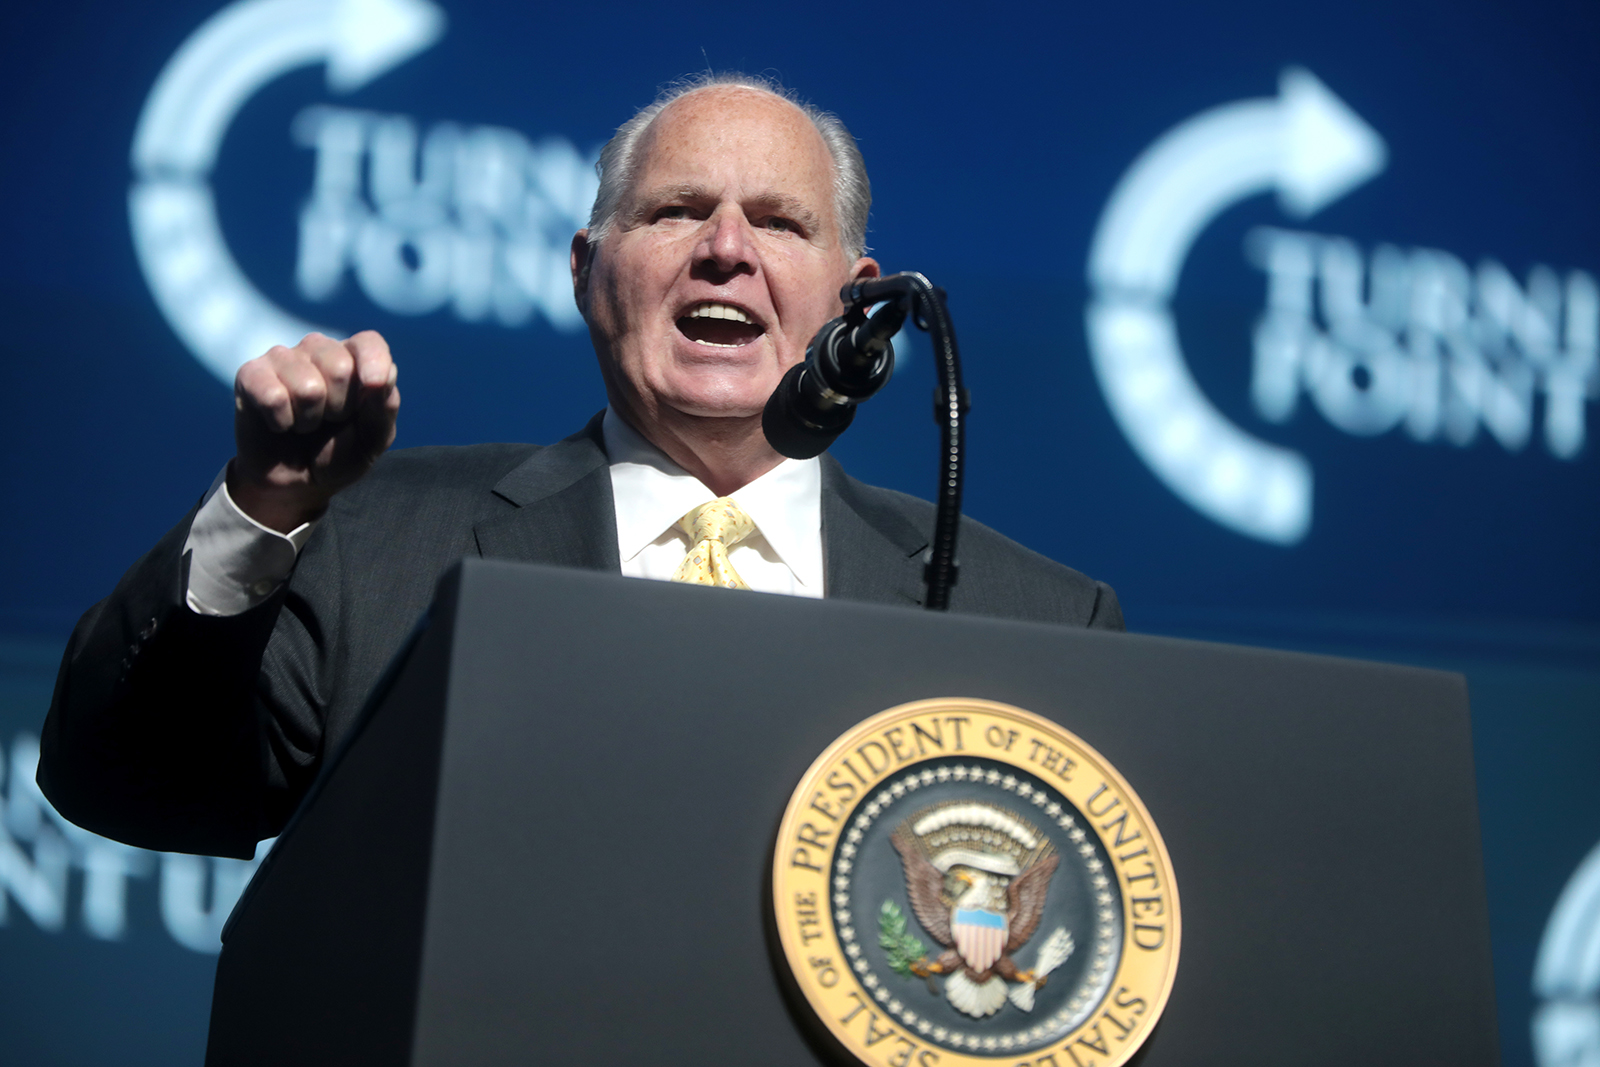 Rush Limbaugh addresses the 2019 Student Action Summit, hosted by Turning Point USA, at the Palm Beach County Convention Center in West Palm Beach, Florida, on Dec. 21, 2019. Photo by Gage Skidmore/Creative Commons